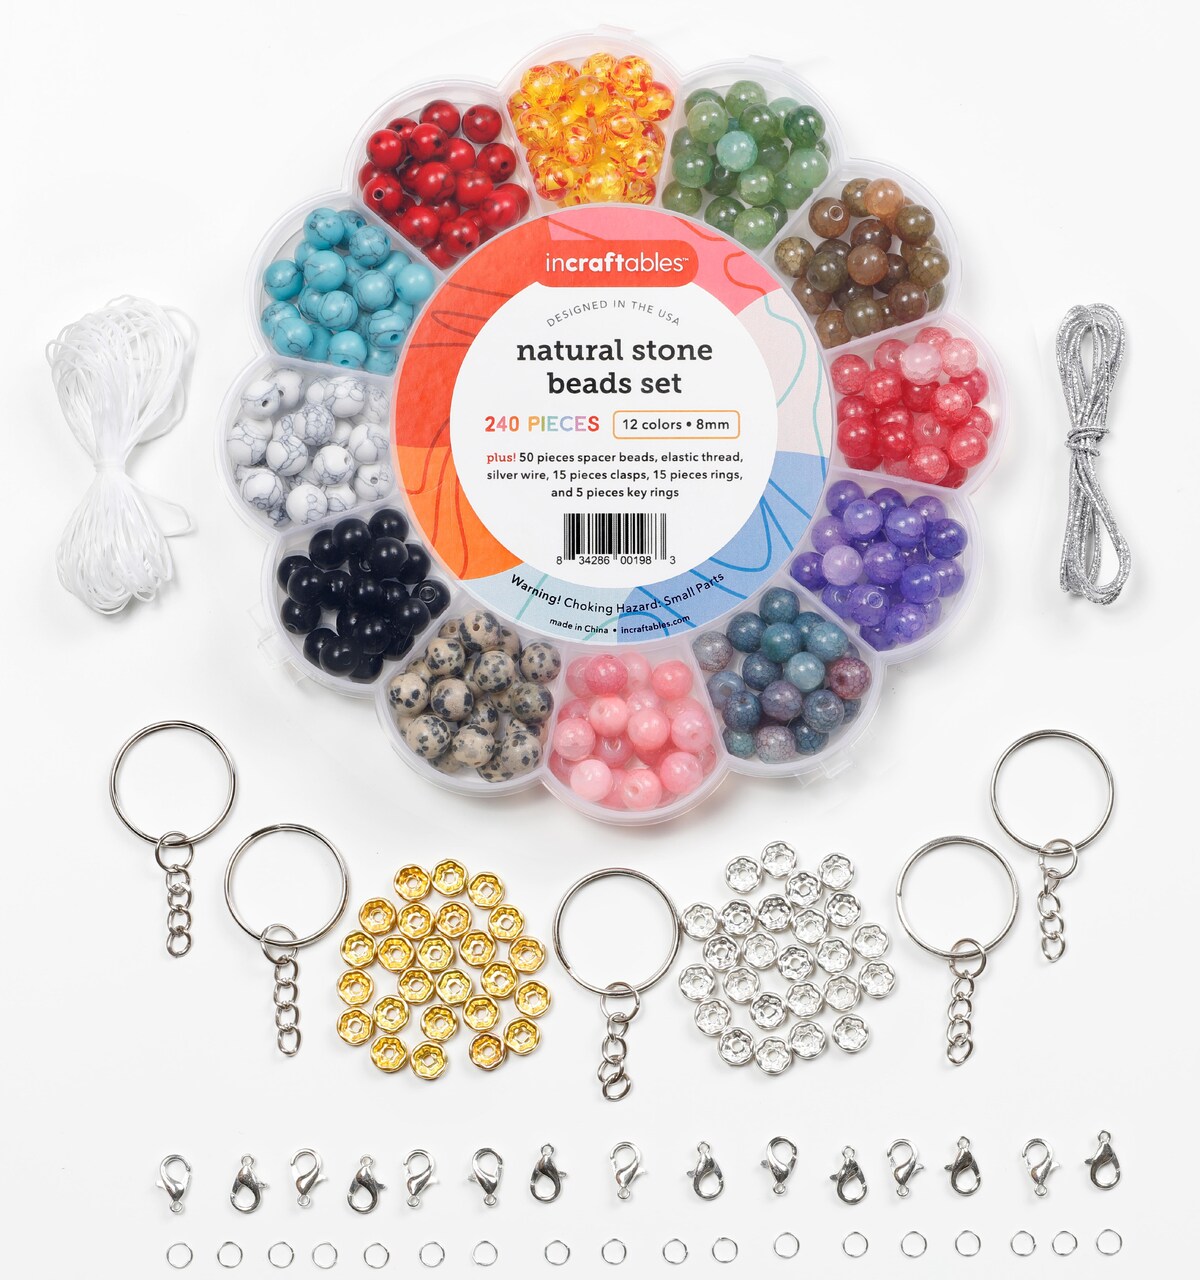 Incraftables Natural Stone Beads 12 Colors 240pcs Set for DIY Jewelry,  Necklace & Bracelet Making. Assorted Real Crystal Chakra Bead Kit with  Spacer Beads, Elastic String & Organizer for Adults & Kids